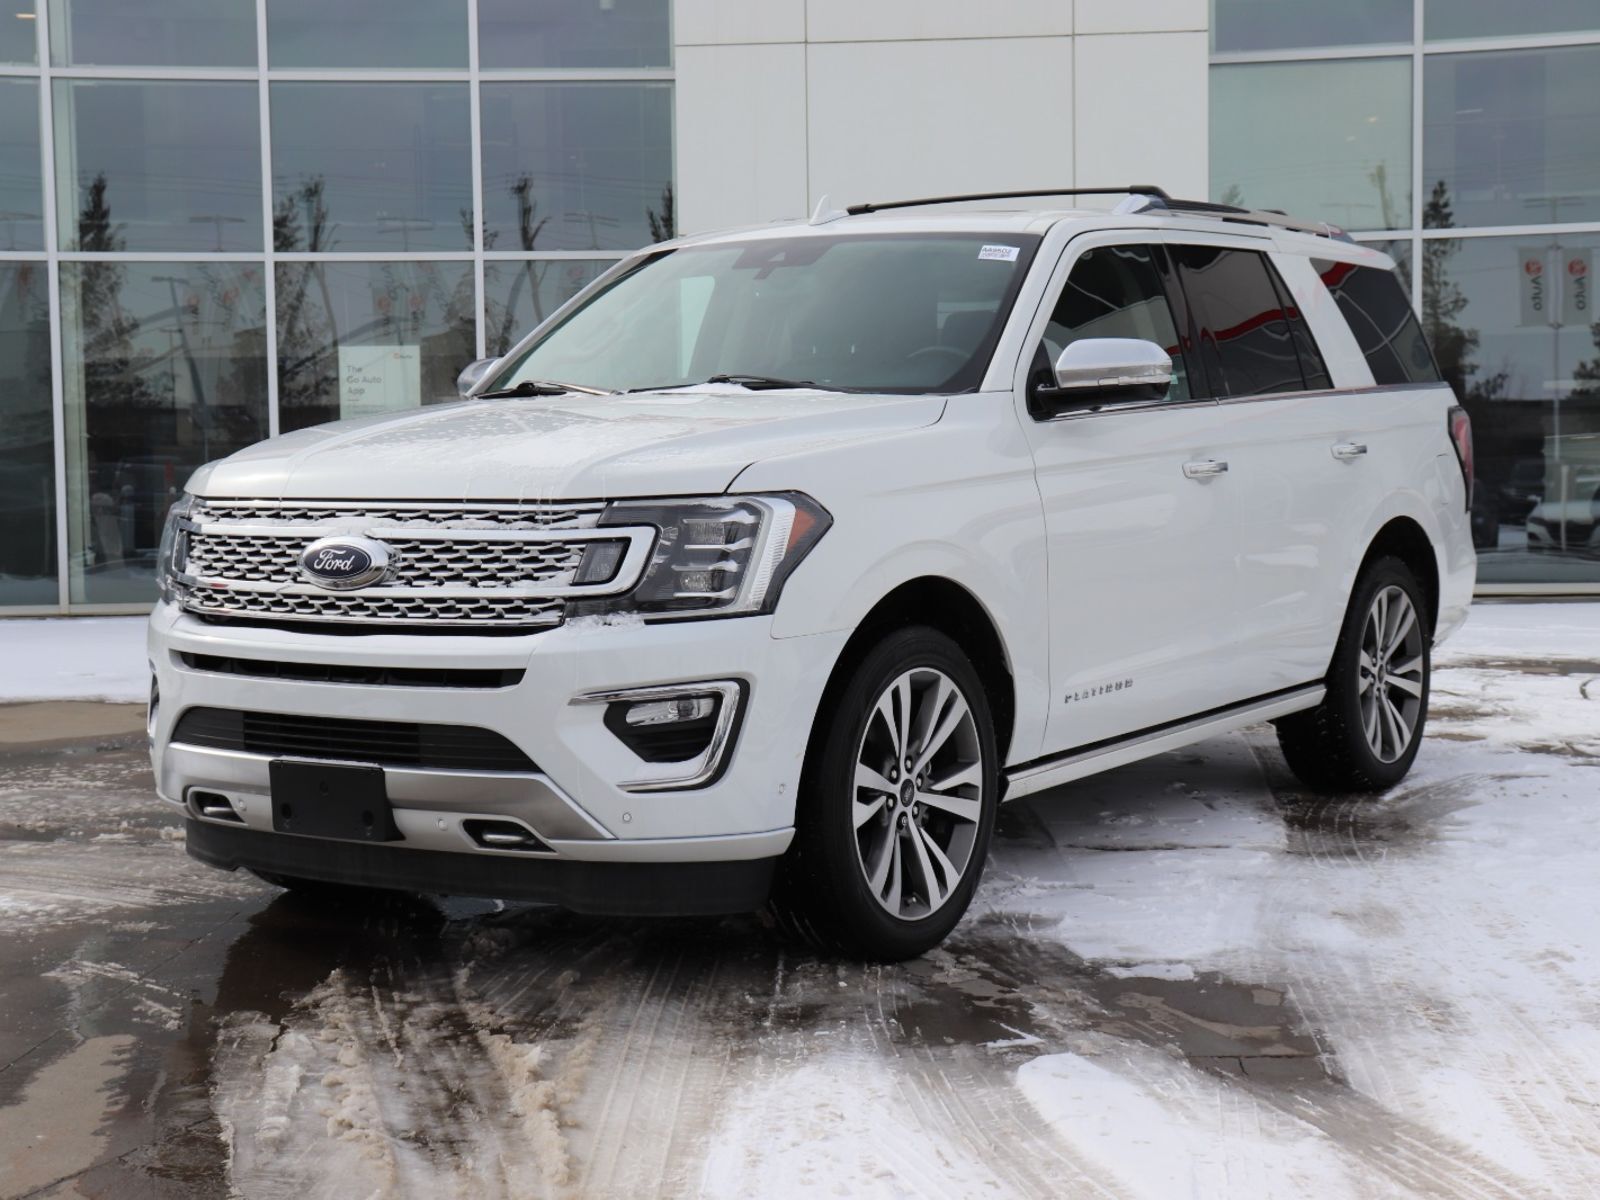 2021 Ford Expedition PLATINUM ROOF/NAV/STARTER/HEATED COOLED SEATS!